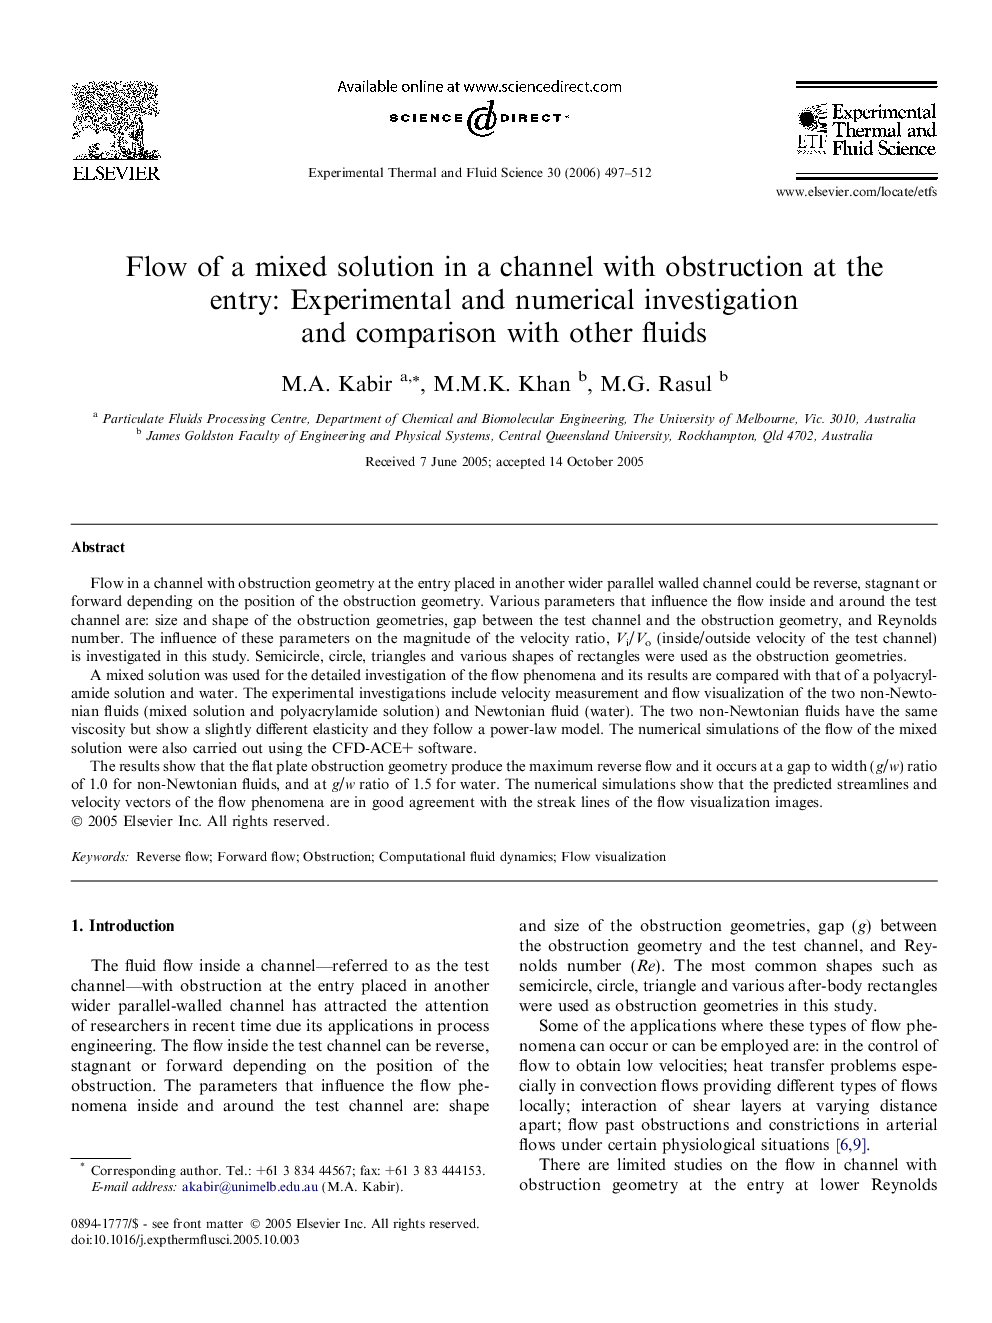 Flow of a mixed solution in a channel with obstruction at the entry: Experimental and numerical investigation and comparison with other fluids